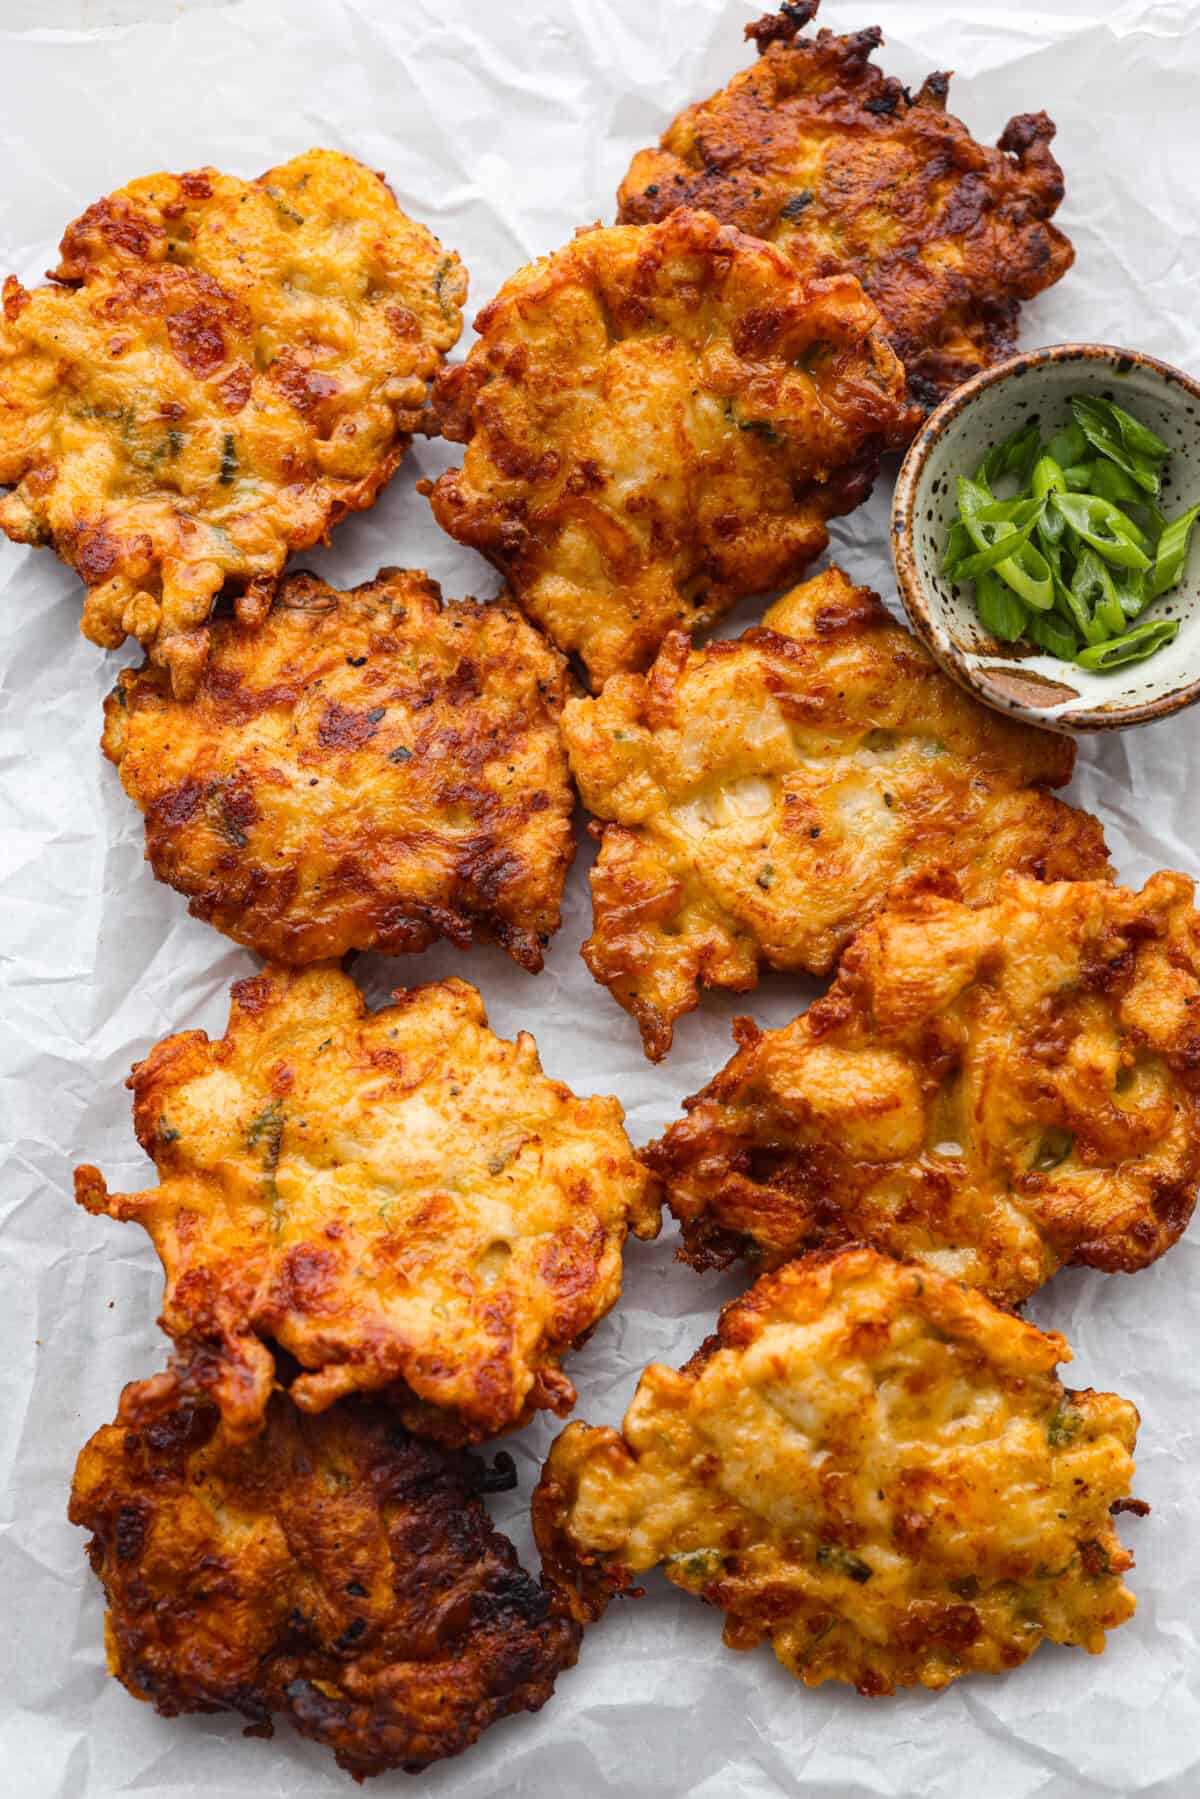 Cooked fritters on parchment paper